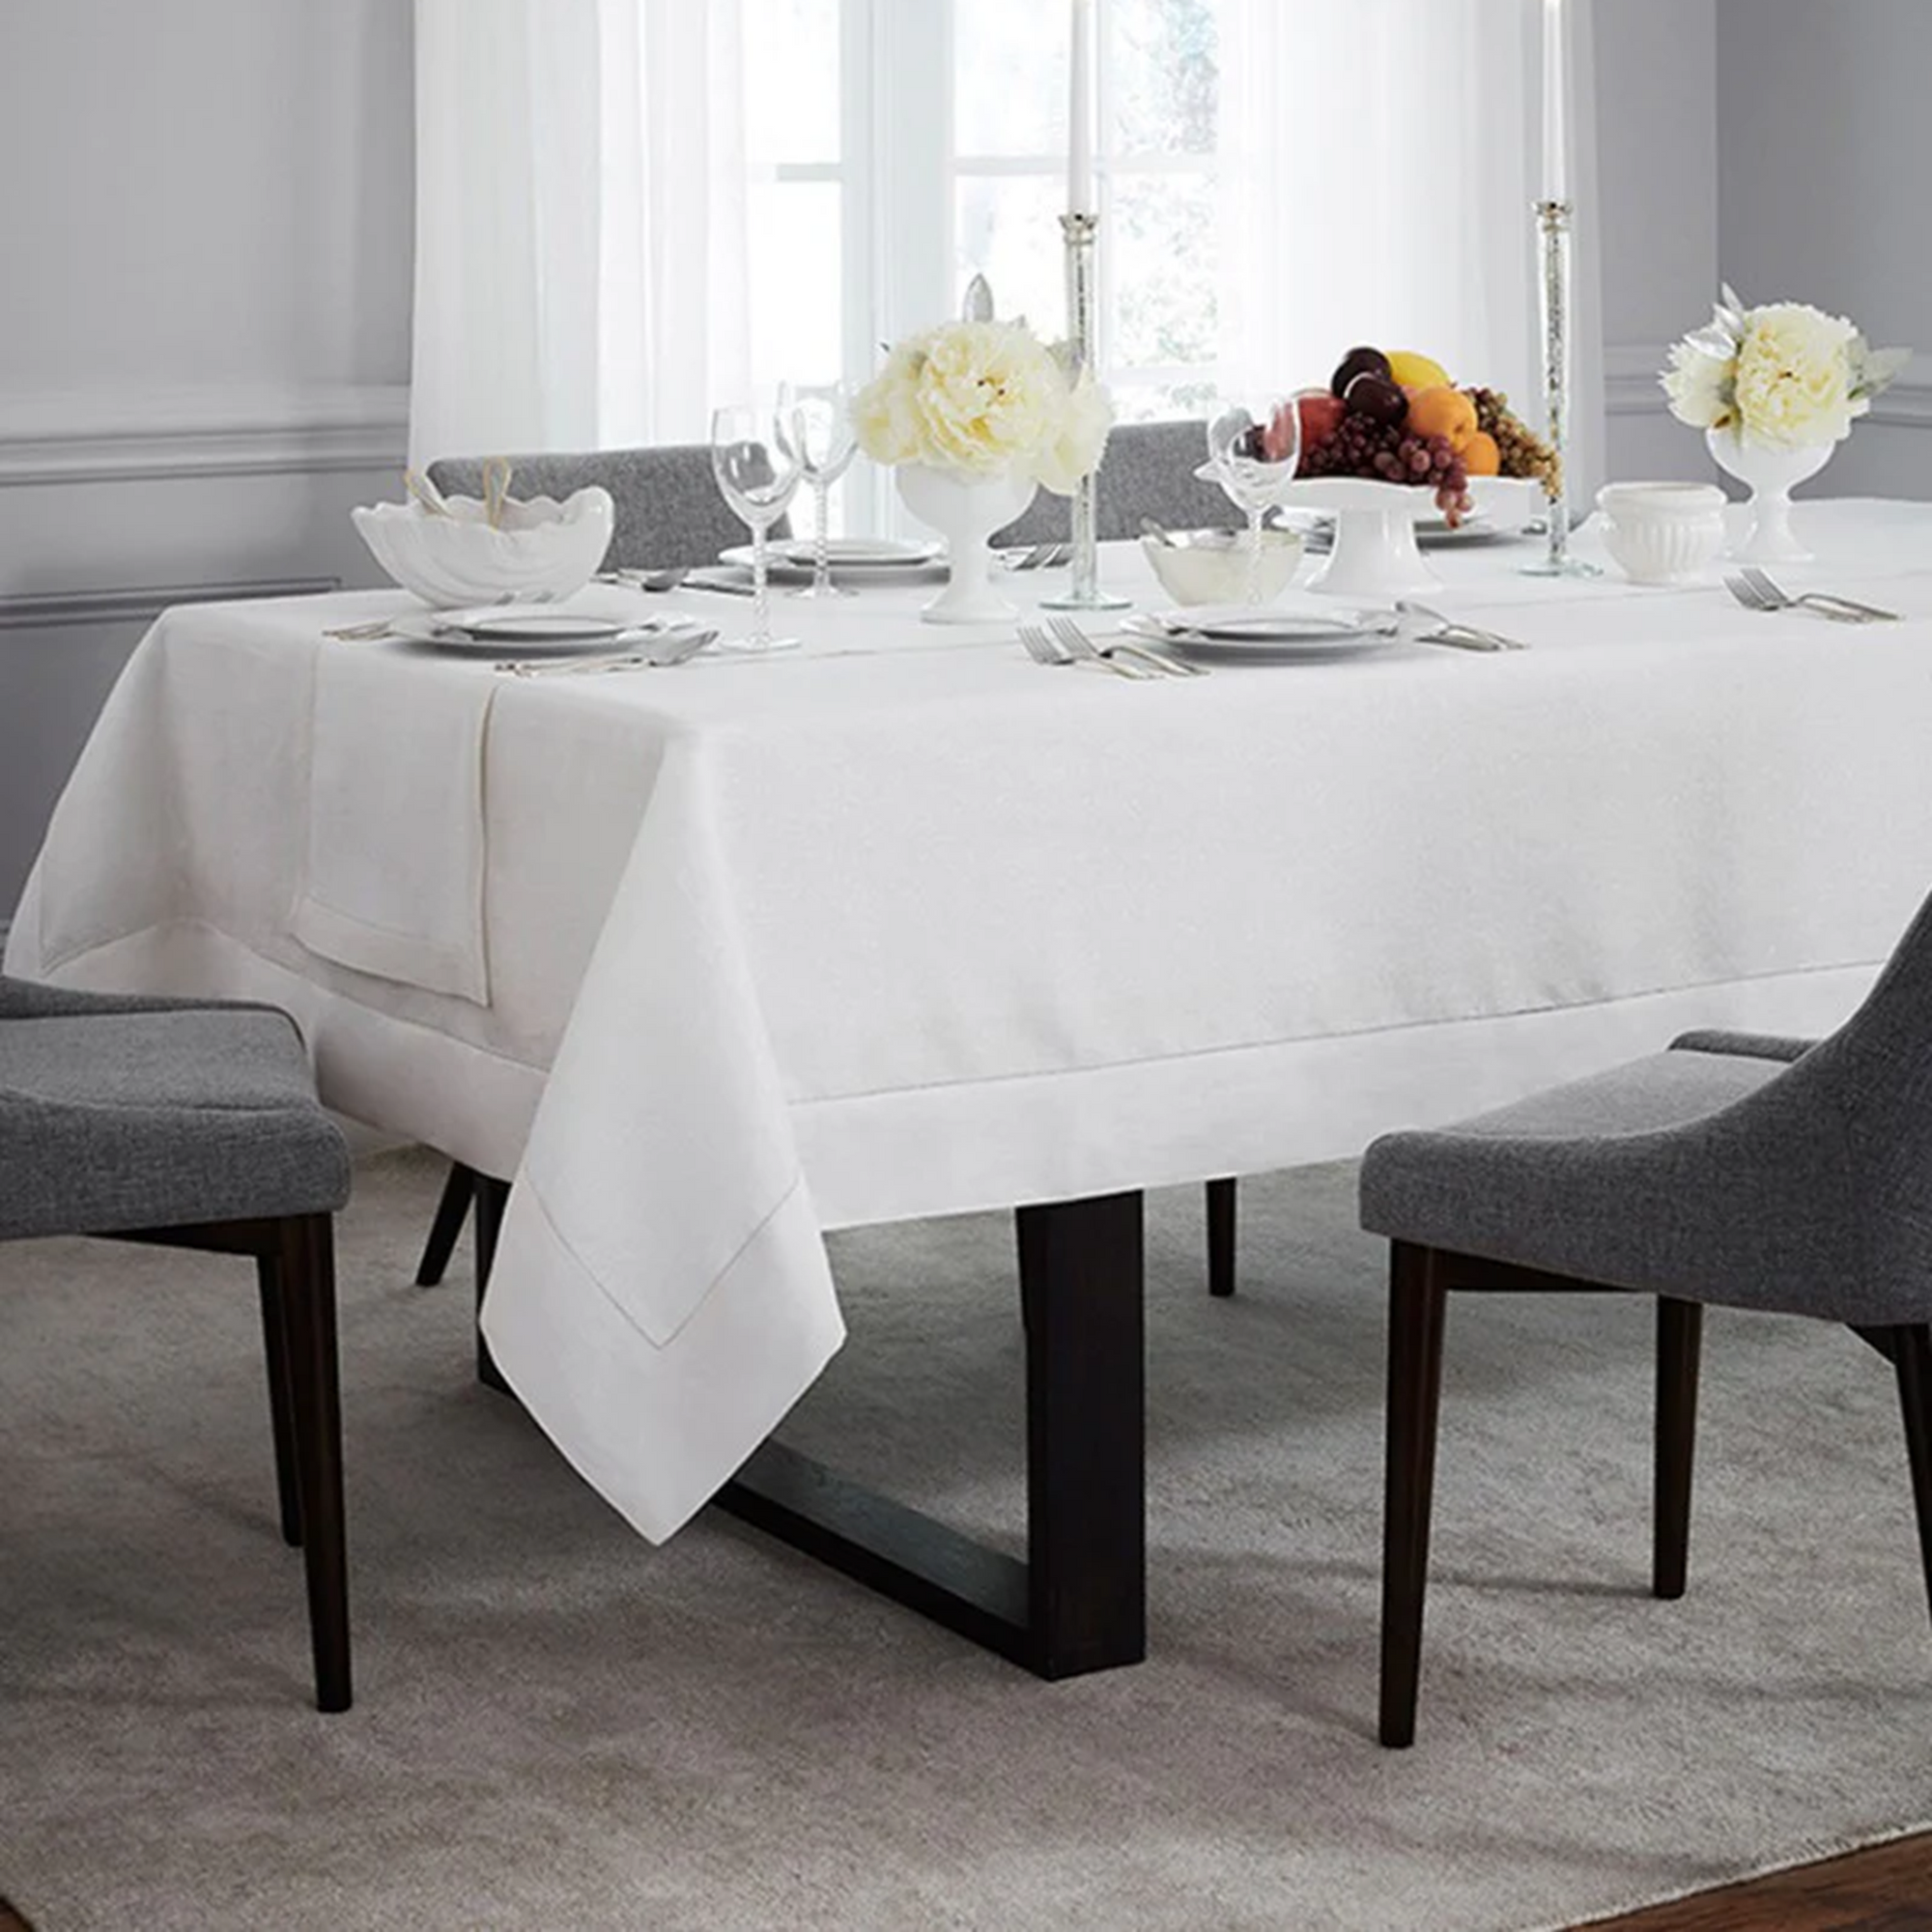 Lifestyle Image of Sferra Reece Table Linens in Silver/White Color